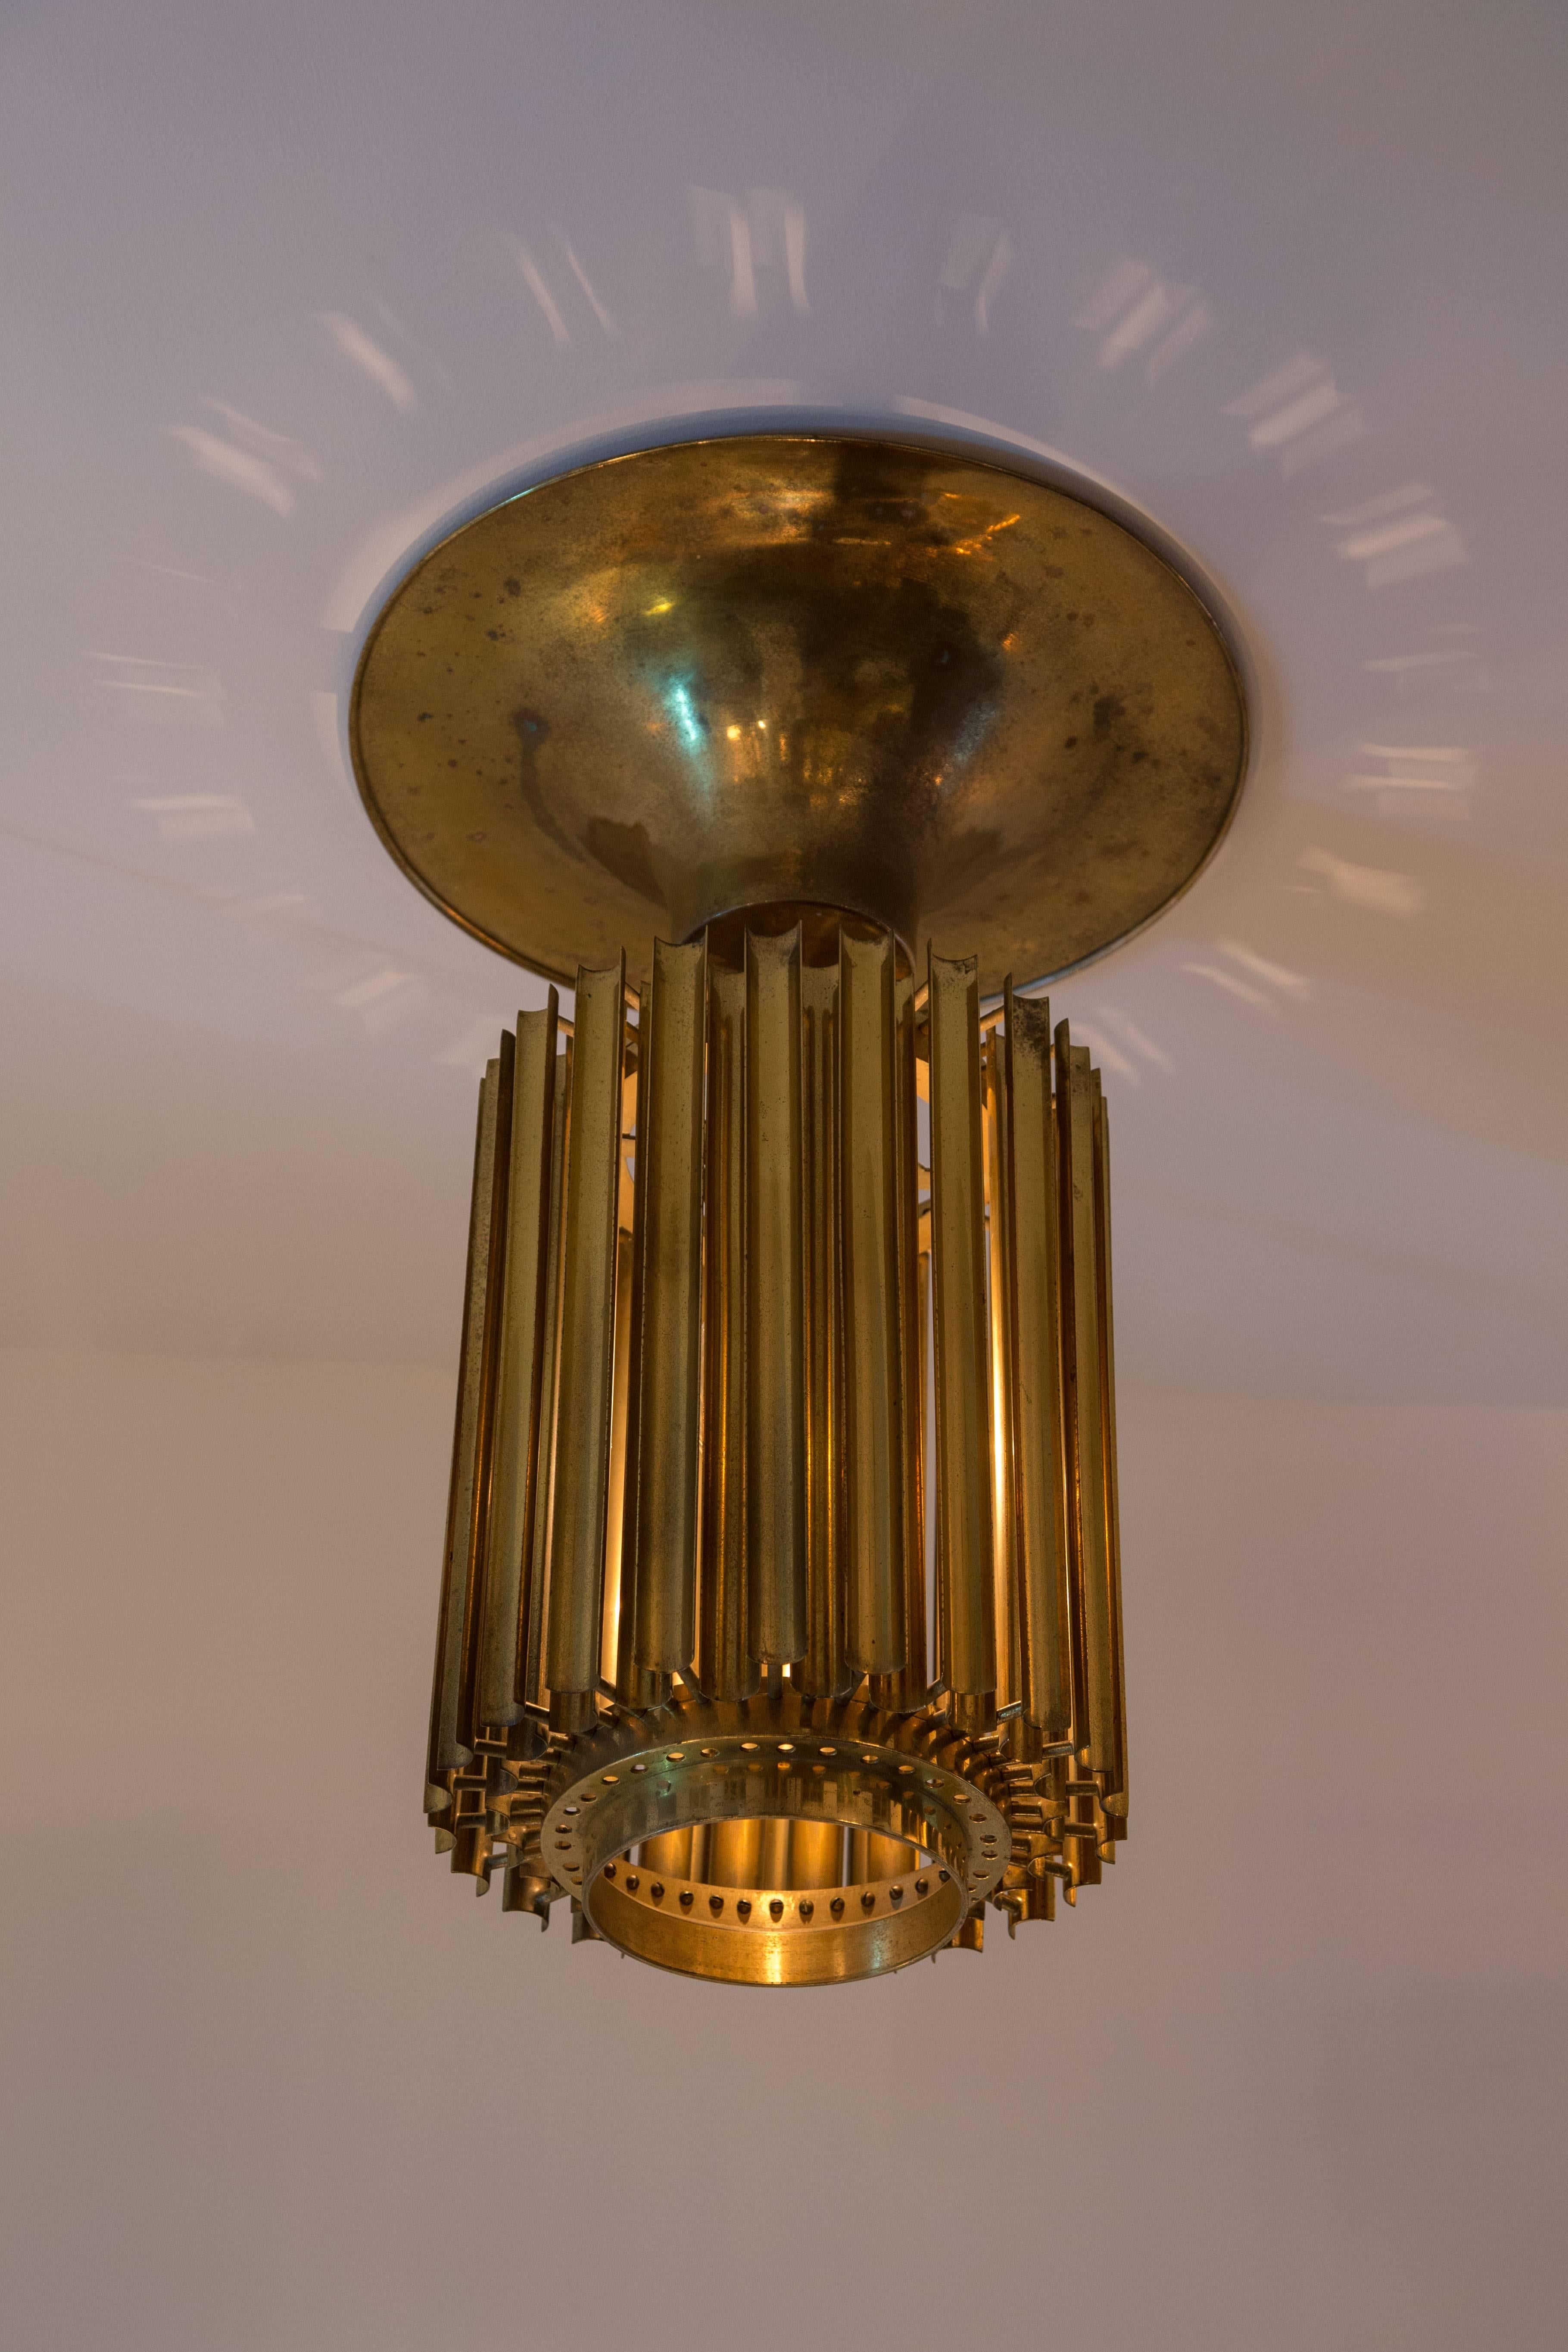 Rare solid brass pendant with corrugated columns. Provides uplight and downlight. Made by Giuseppe Raimondi co-founder of Gufram Italia, a creative lab know for its influence in the field of Industrial Design in the 1960s and 1970s. Rewired. E27